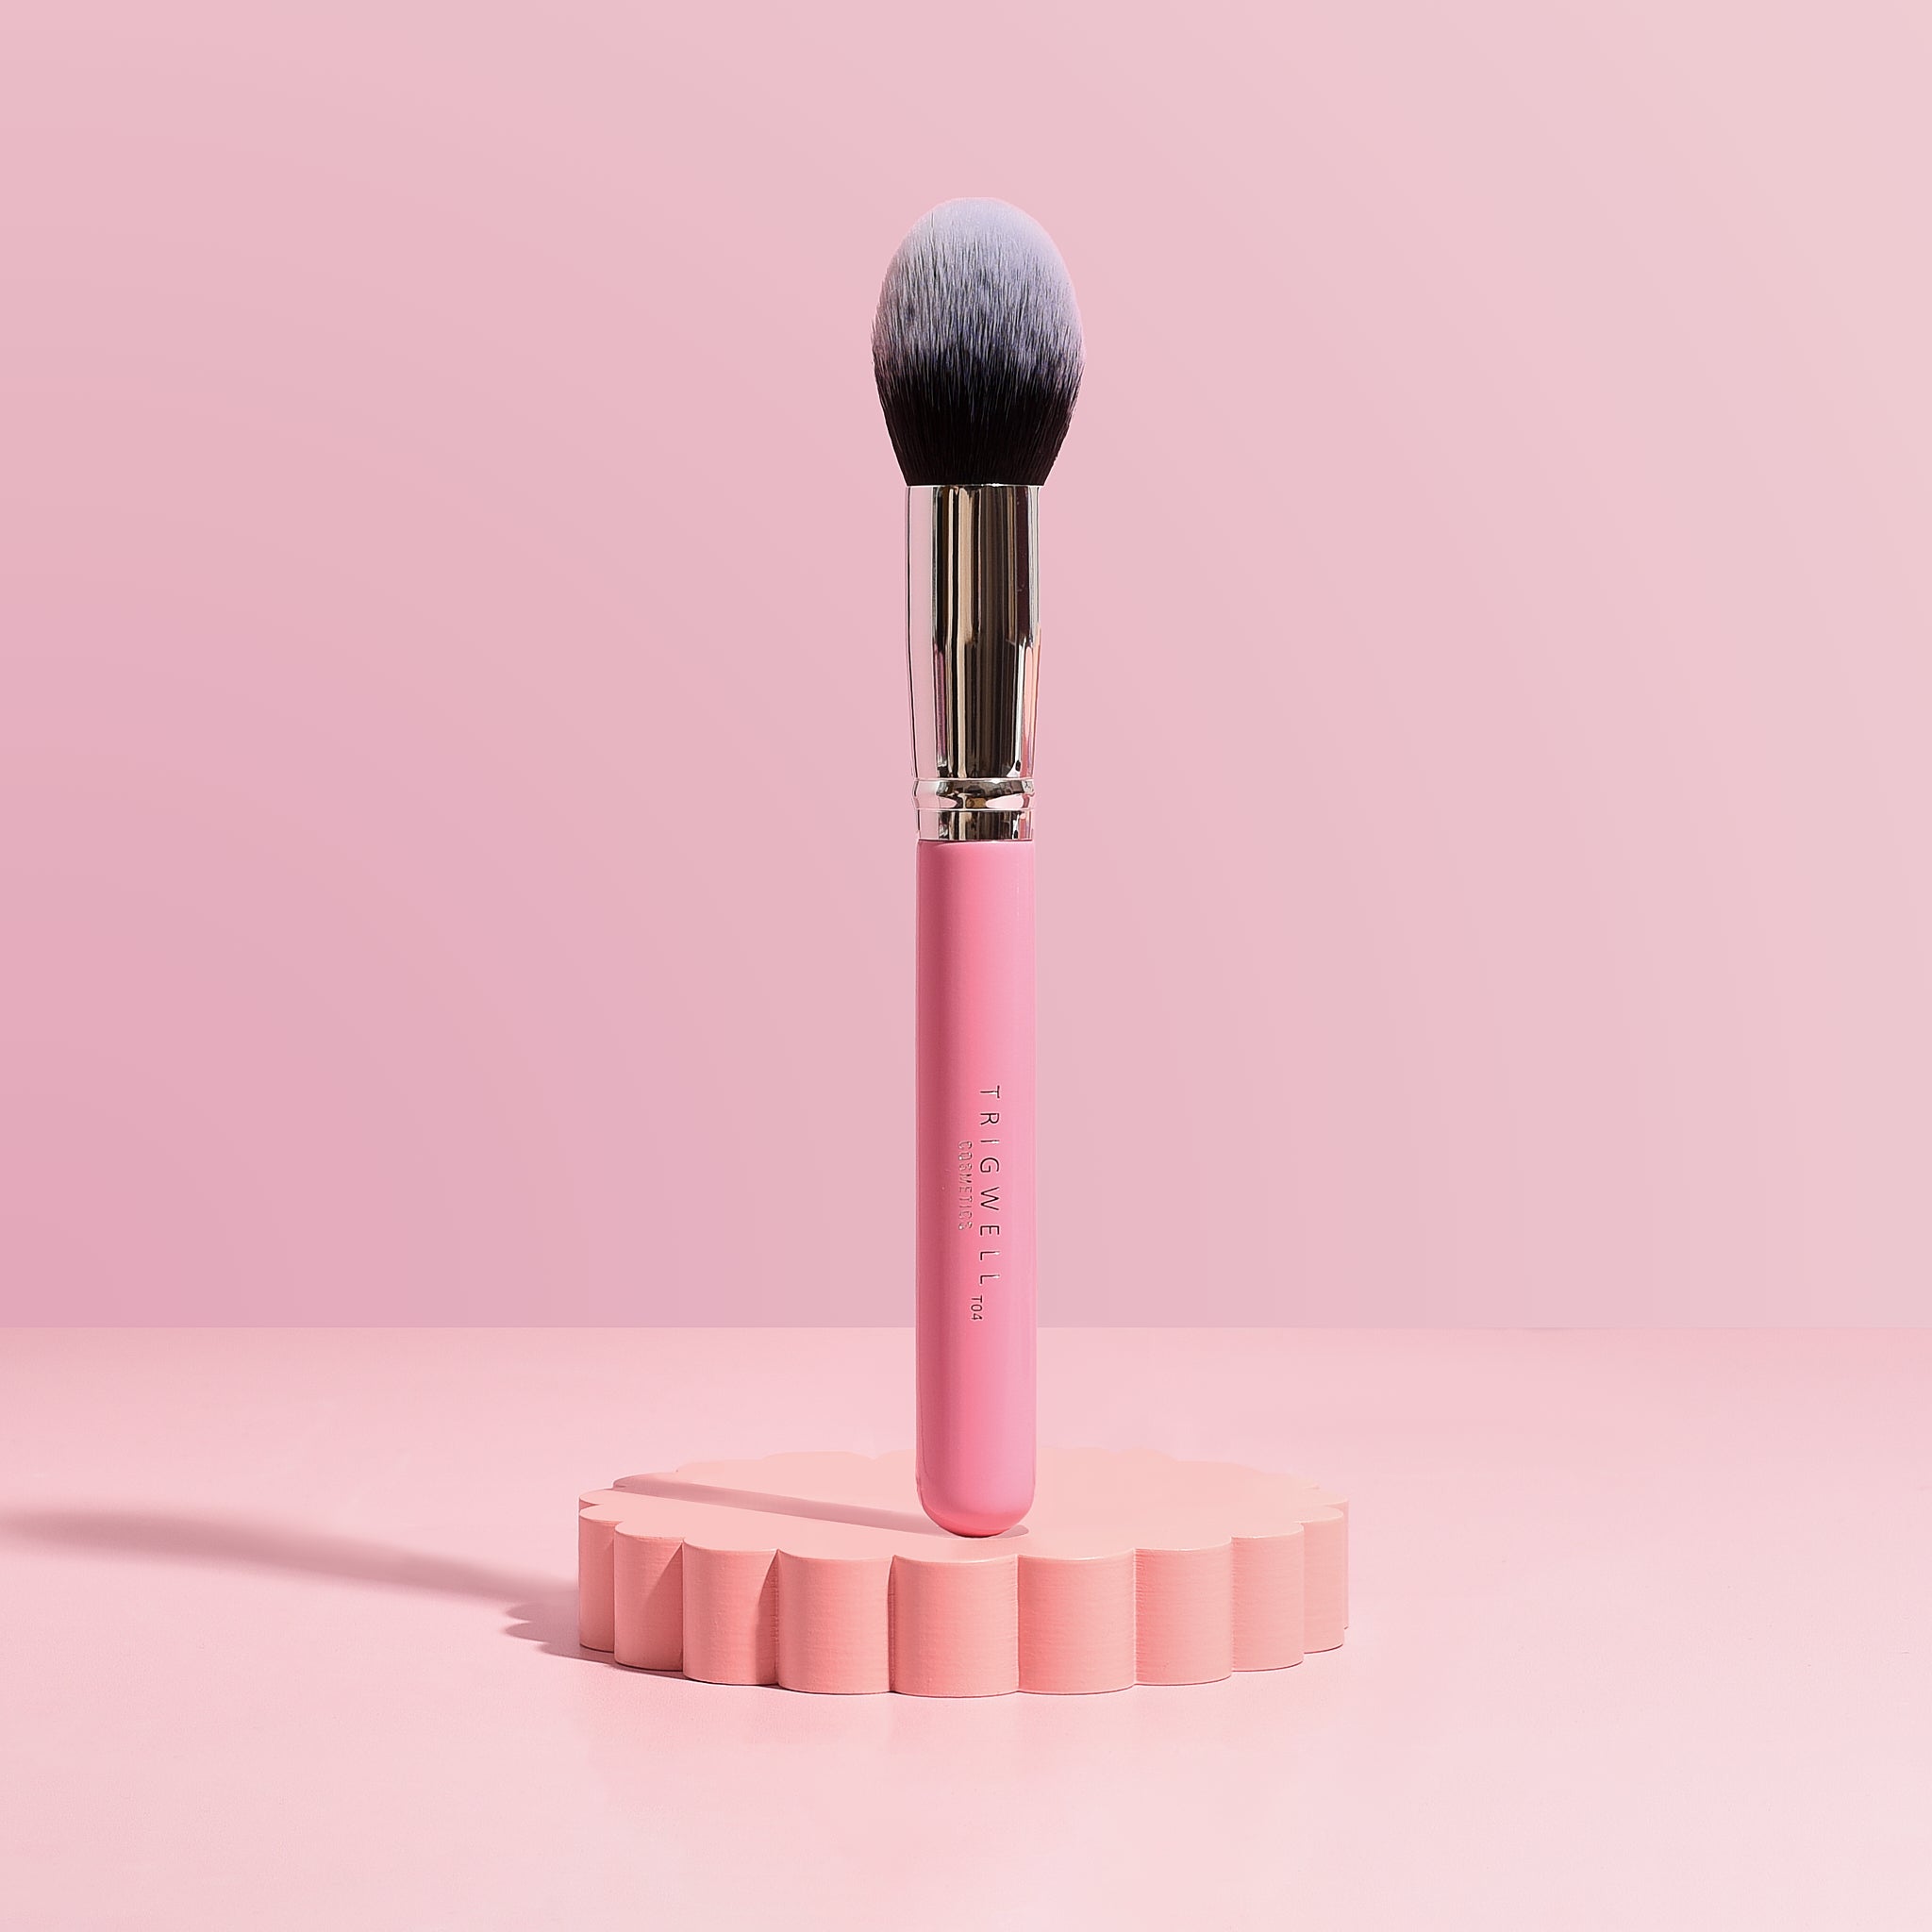 Image of T04 brush - a dome shaped brush which can be used for foundation and cream products application